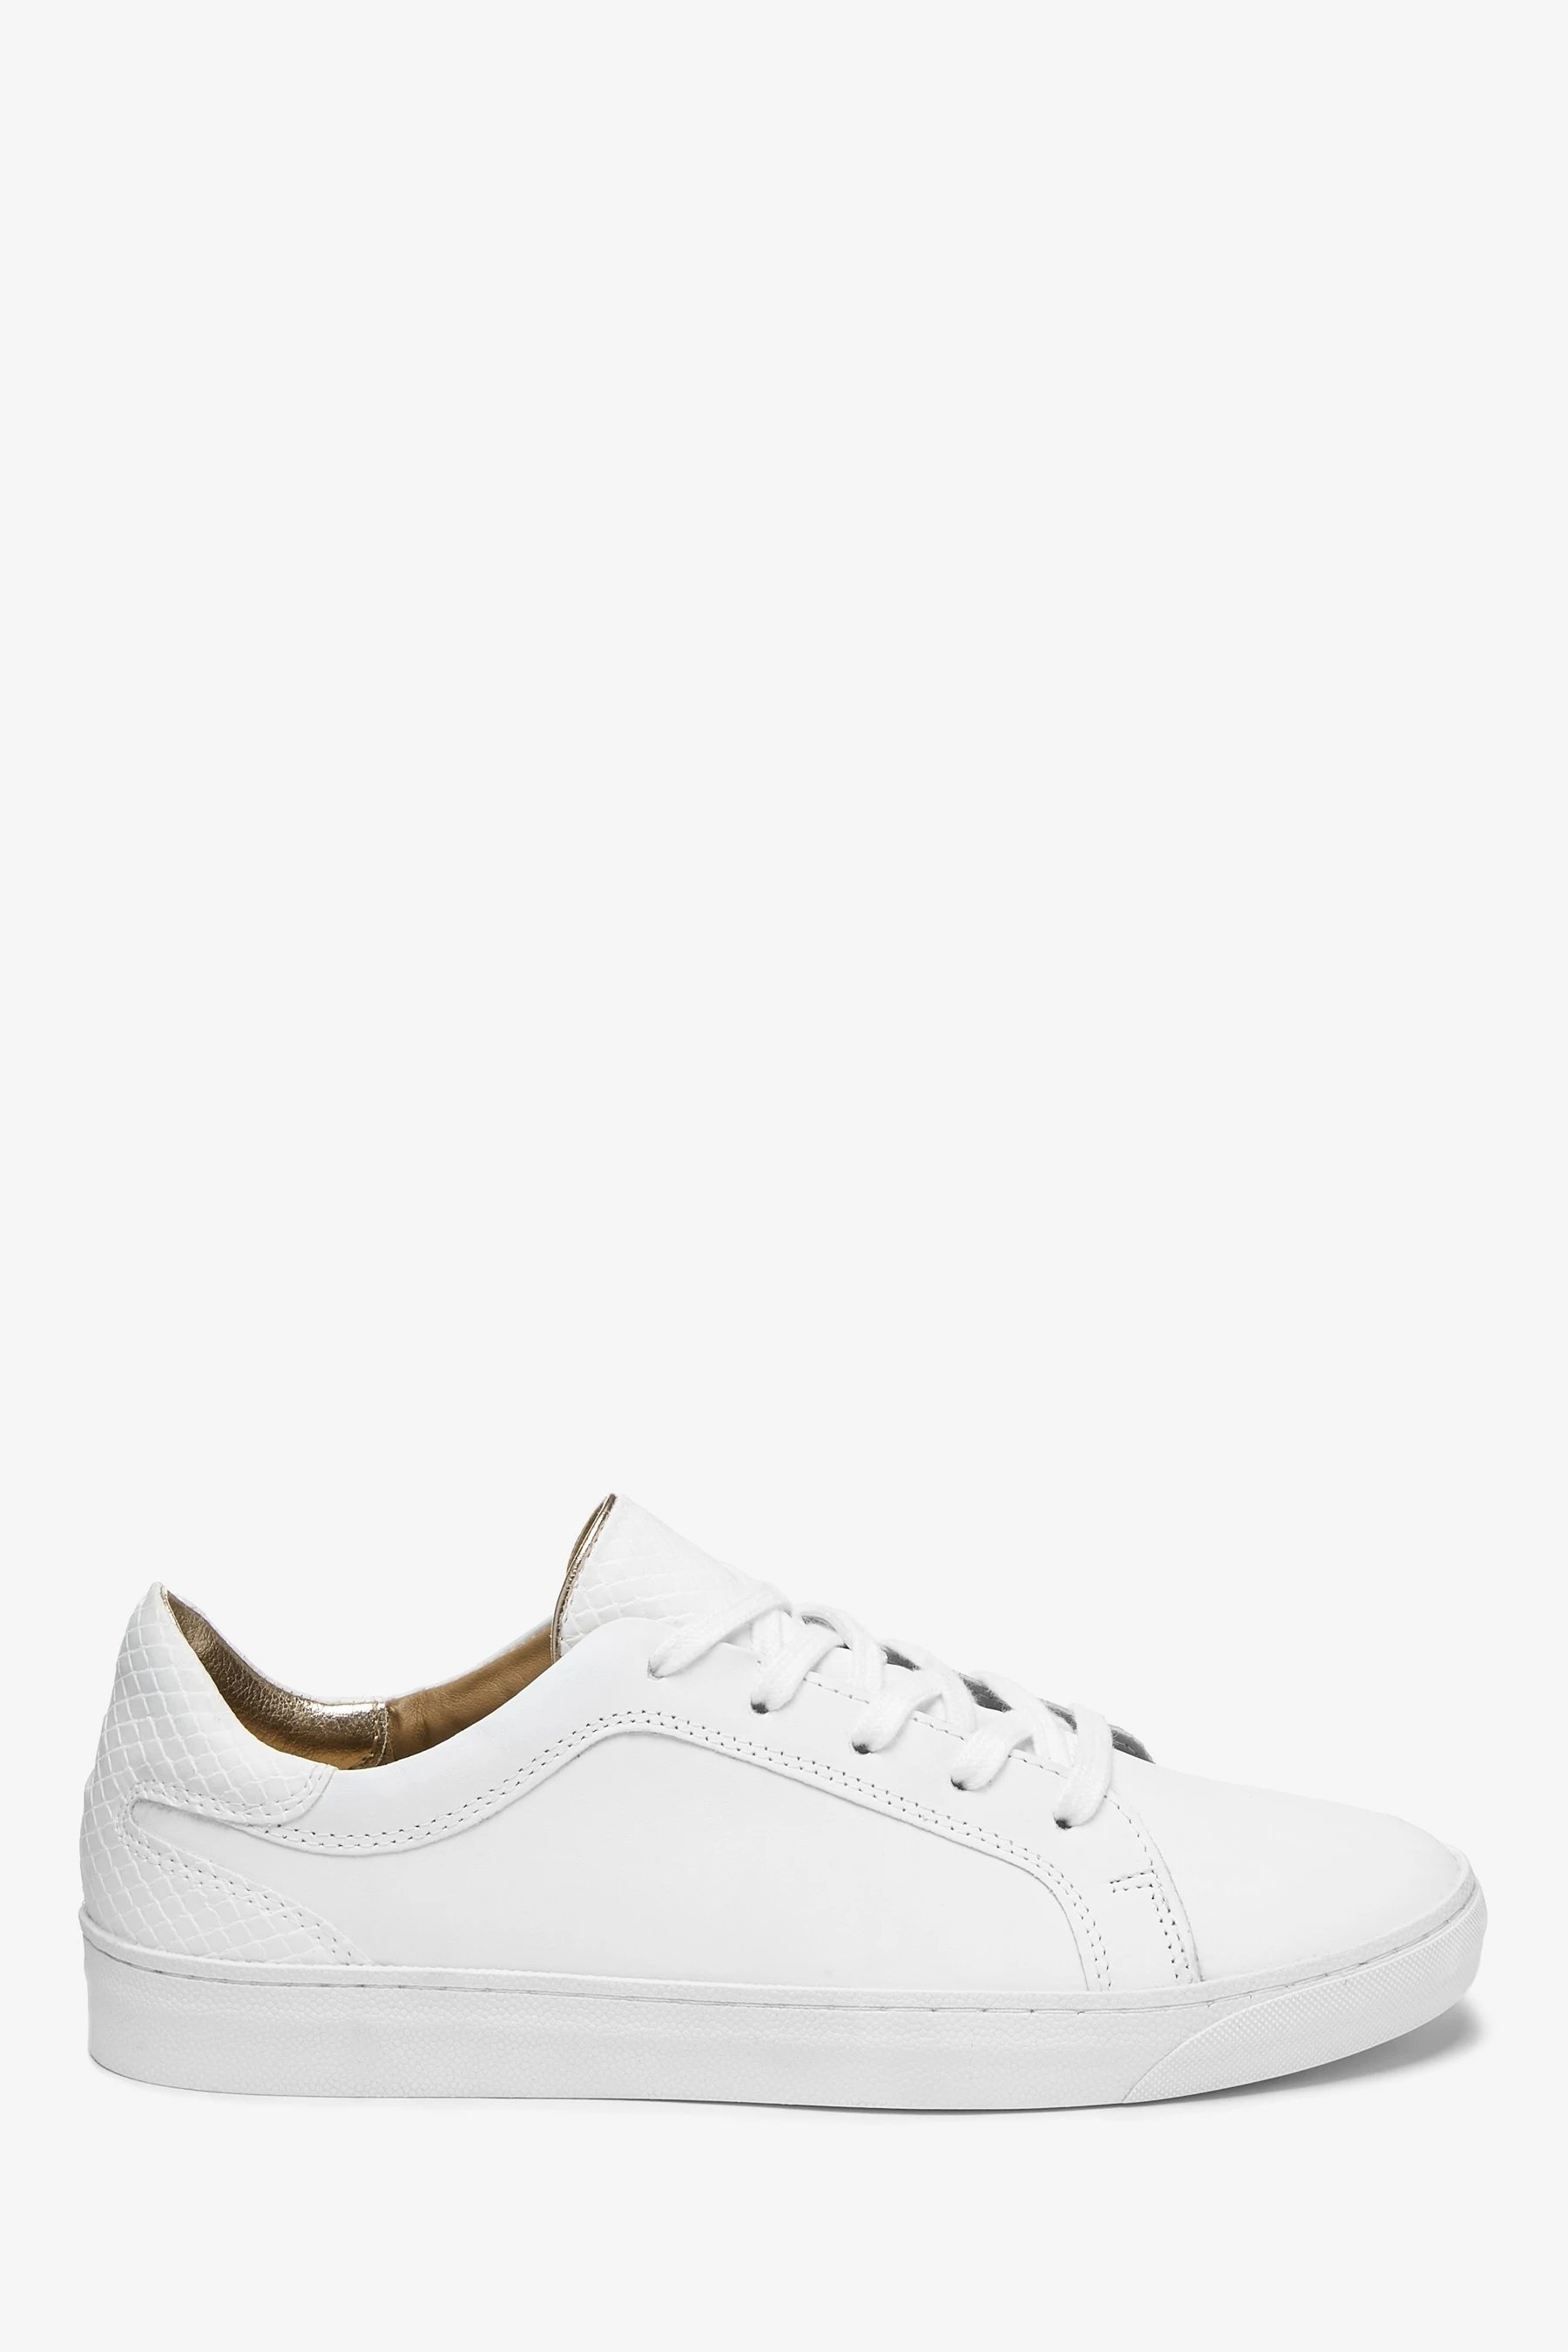 Next Signature Leather Lace-Up Trainers in White.jpg